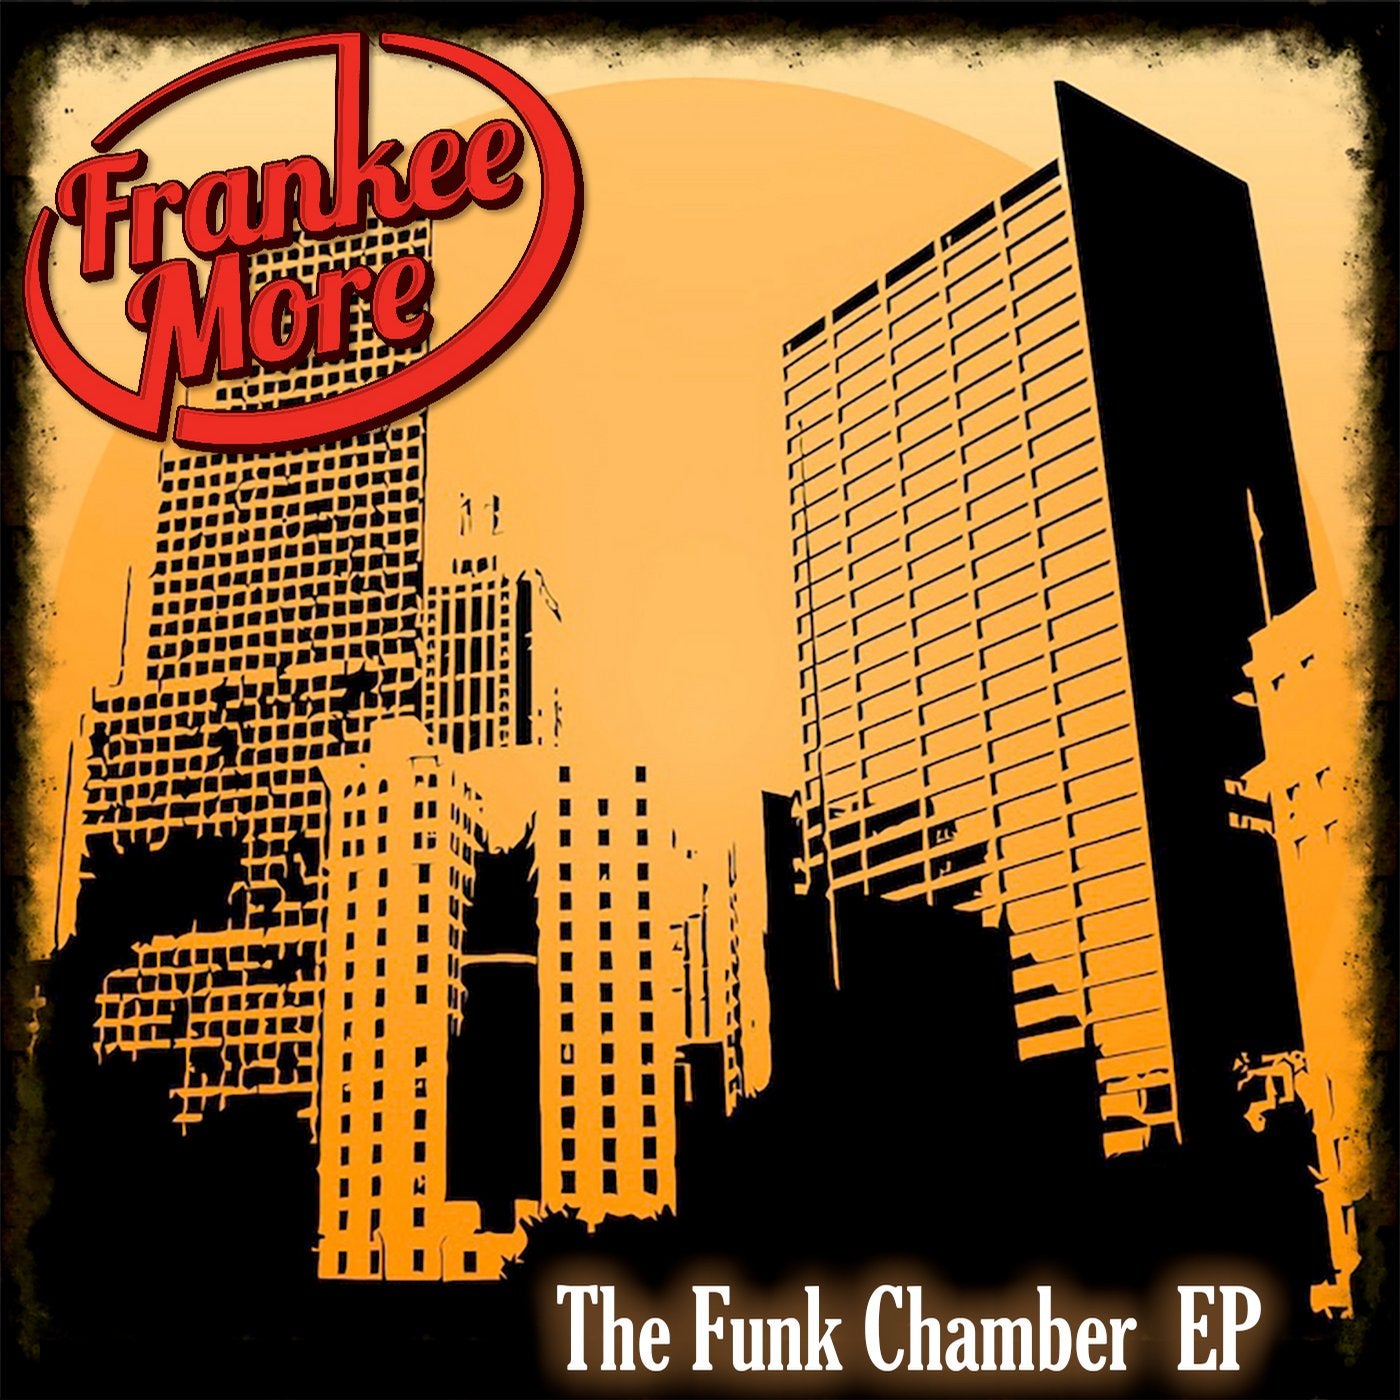 The Funk Chamber EP